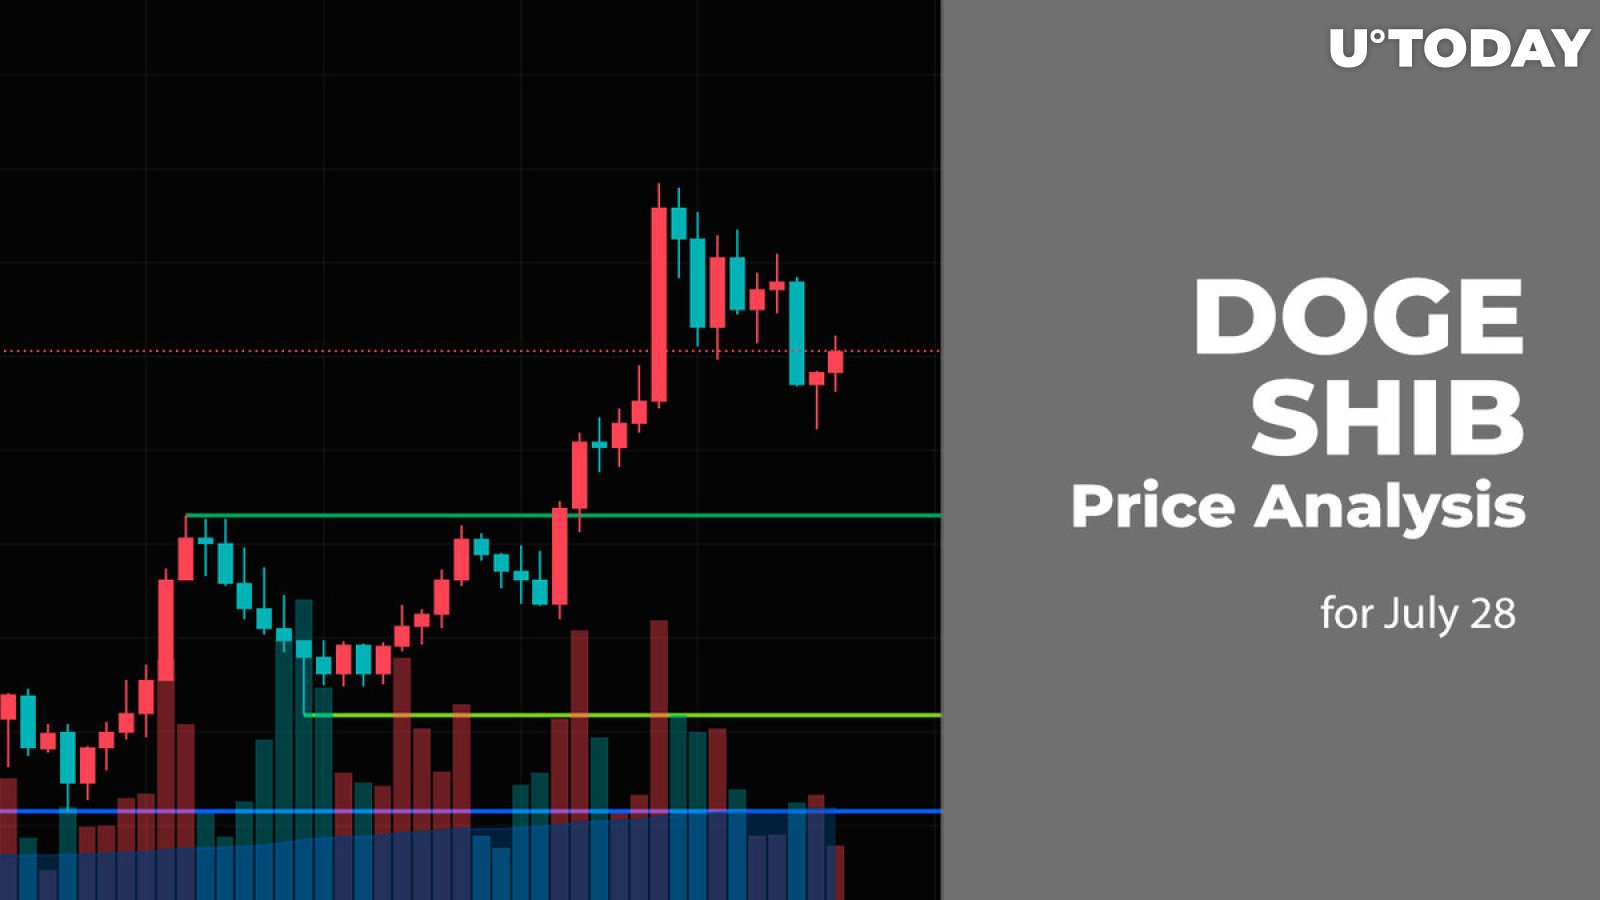 DOGE and SHIB Price Analysis for July 28